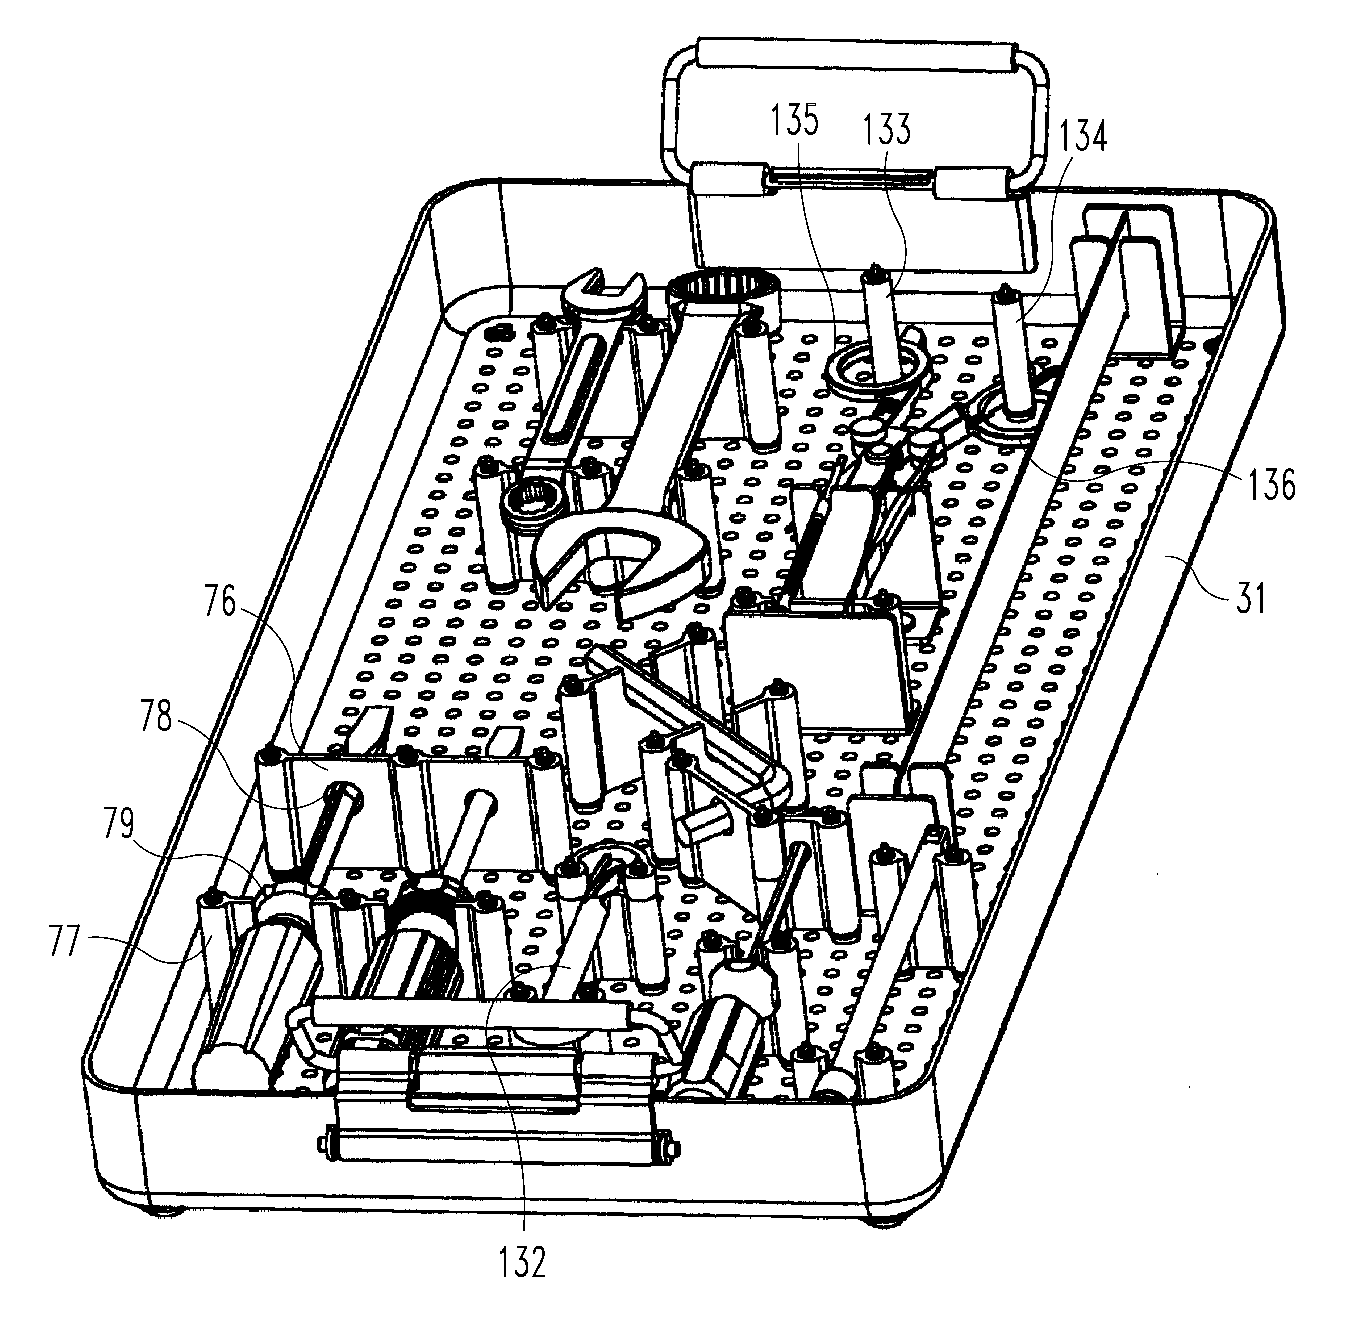 Modular container for medical instruments and implants with extruded flexible bracket and rigid holders